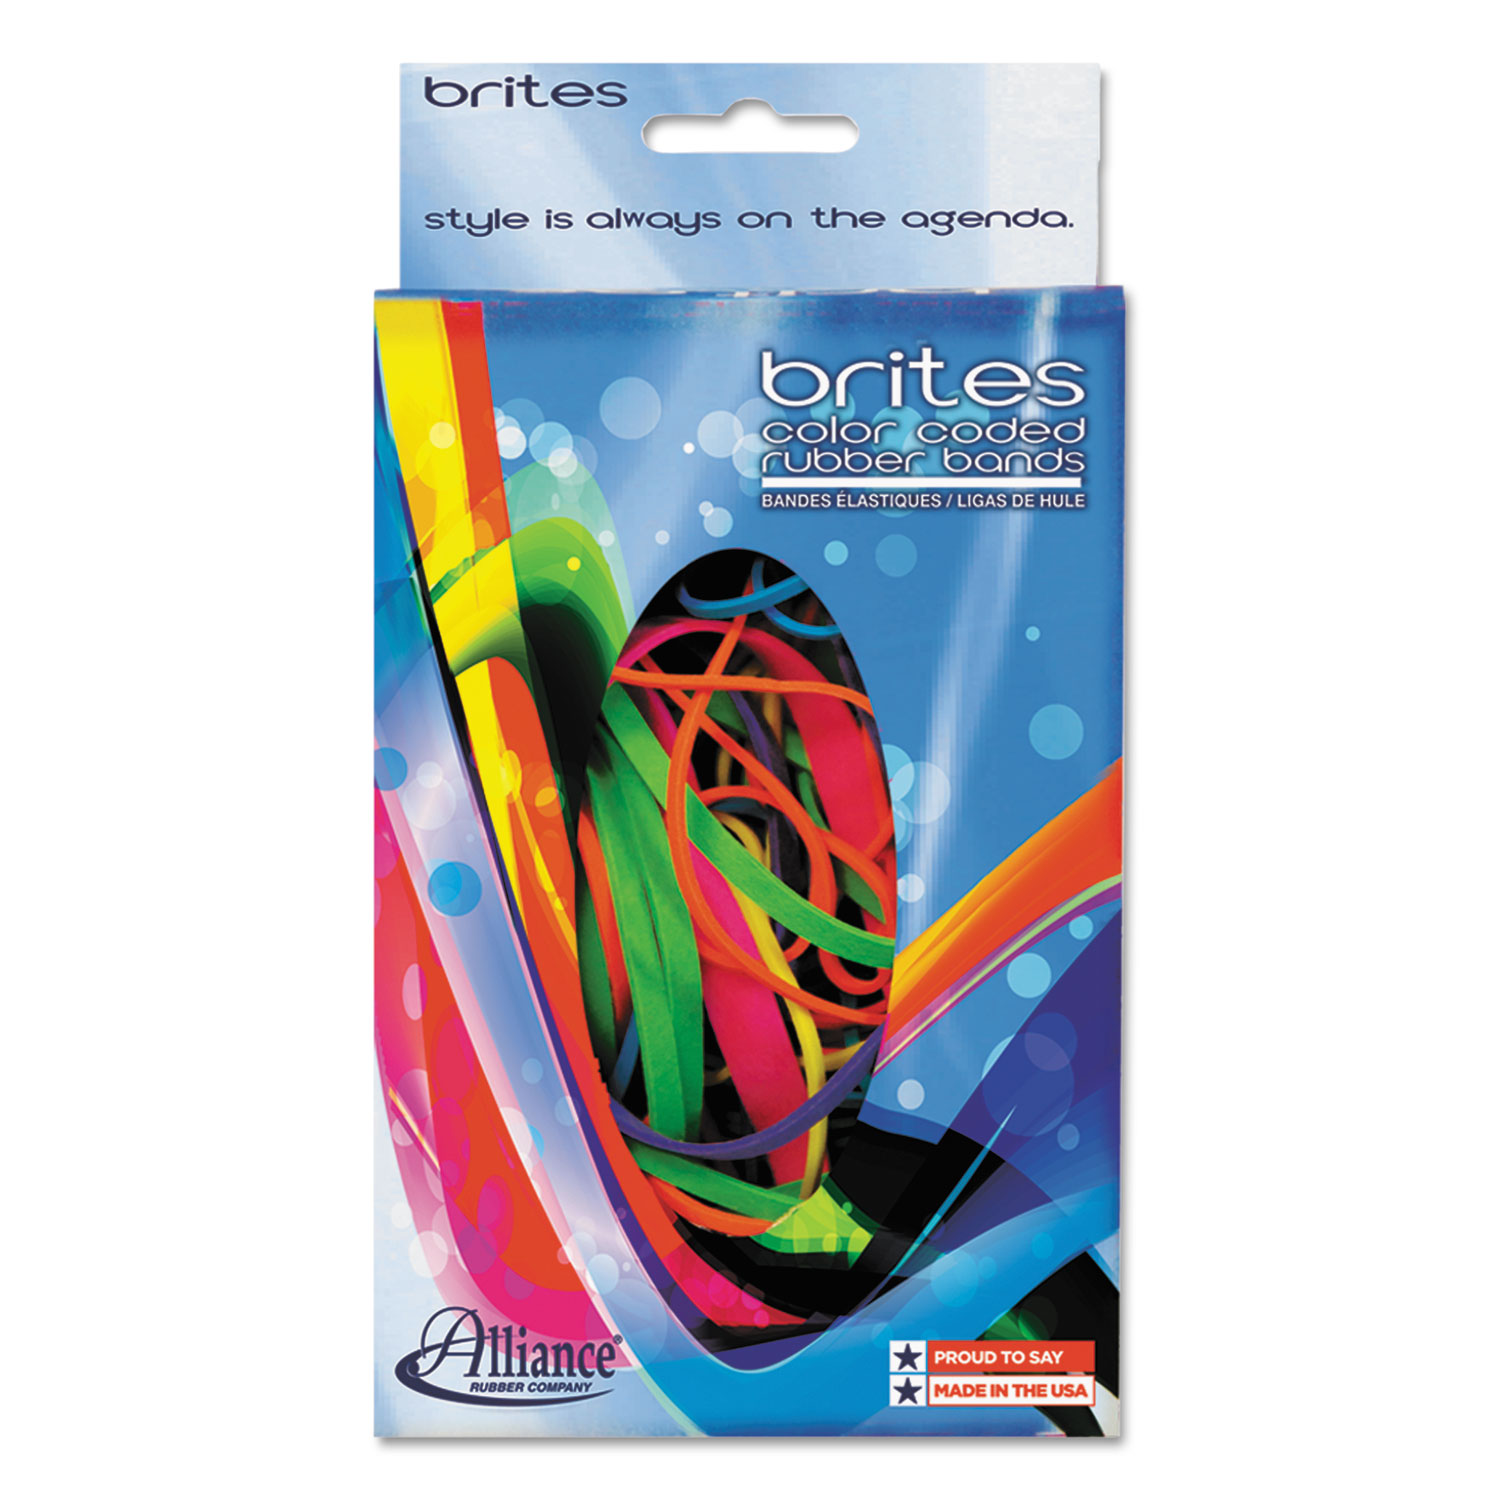  Alliance 07706 Brites Pic-Pac Rubber Bands, Size 54 (Assorted), 0.04 Gauge, Assorted Colors, 1.5 oz Box (ALL07706) 